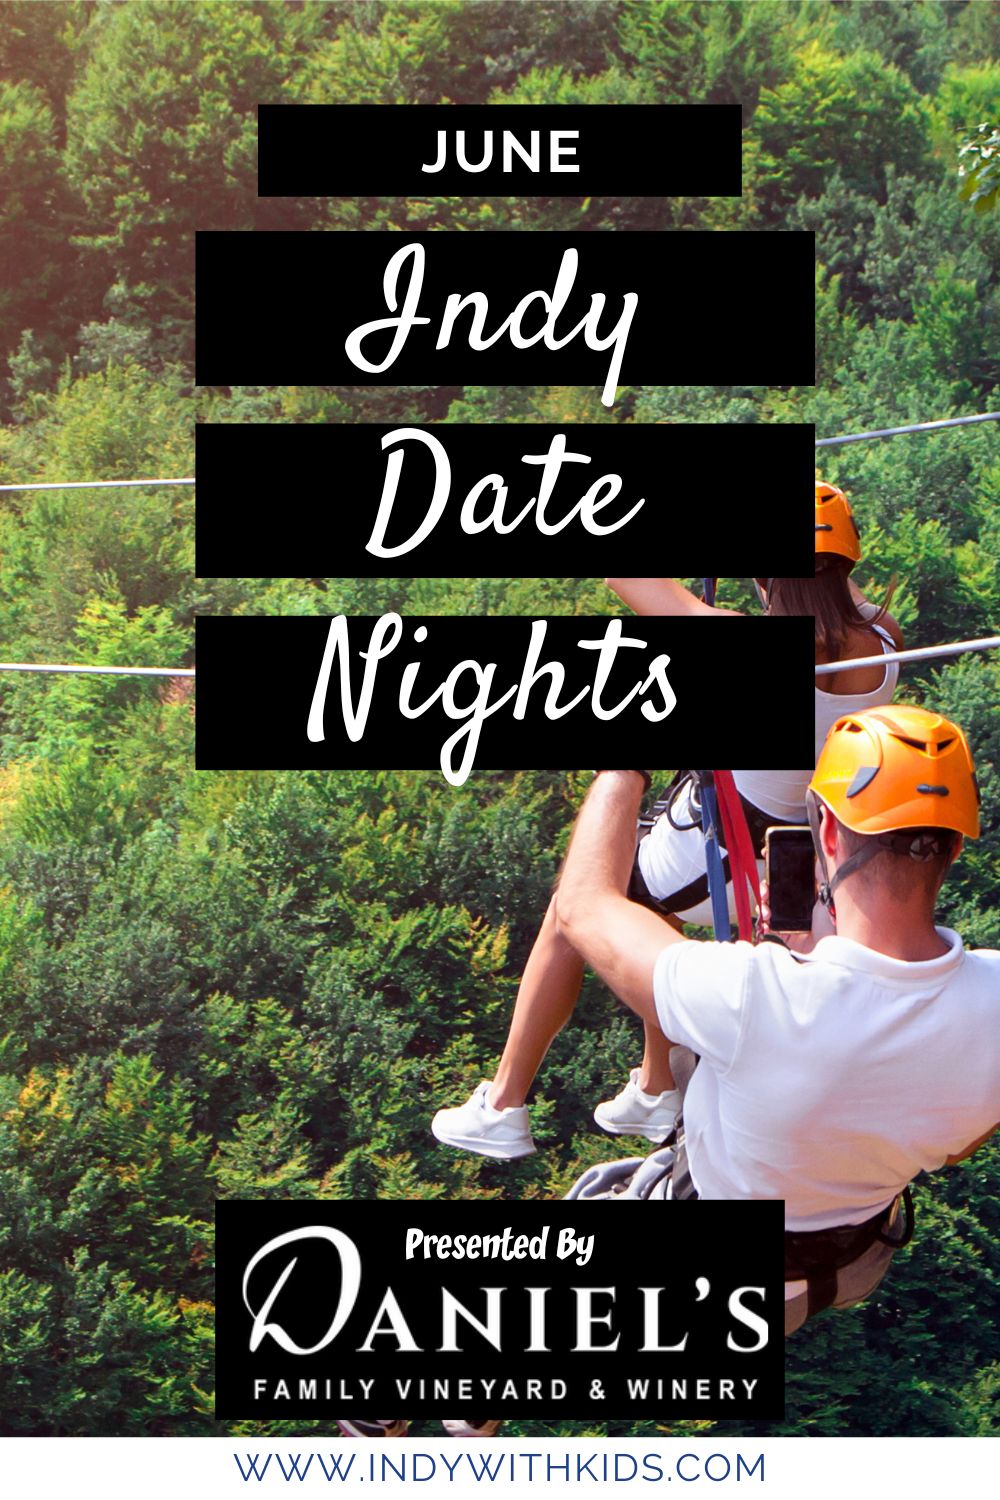 Plan a night out with your sweetheart using one of our summer date ideas,